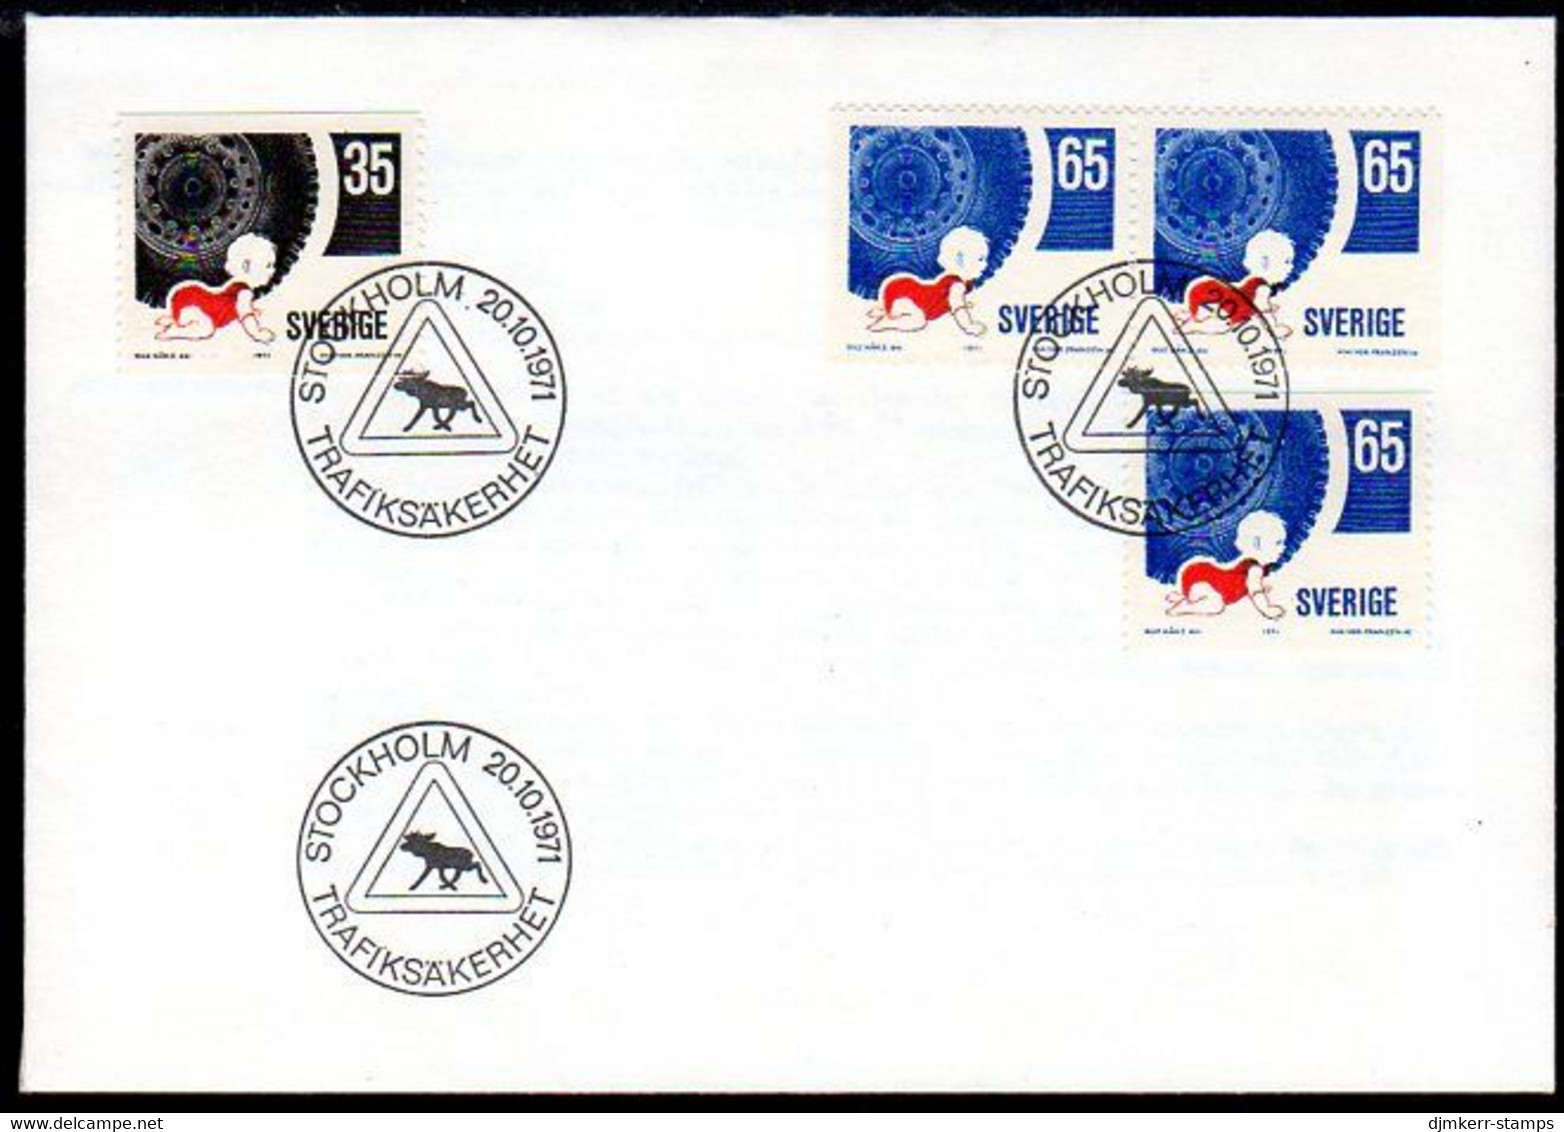 SWEDEN 1971 Road Safety FDC.  Michel 721-22 - FDC